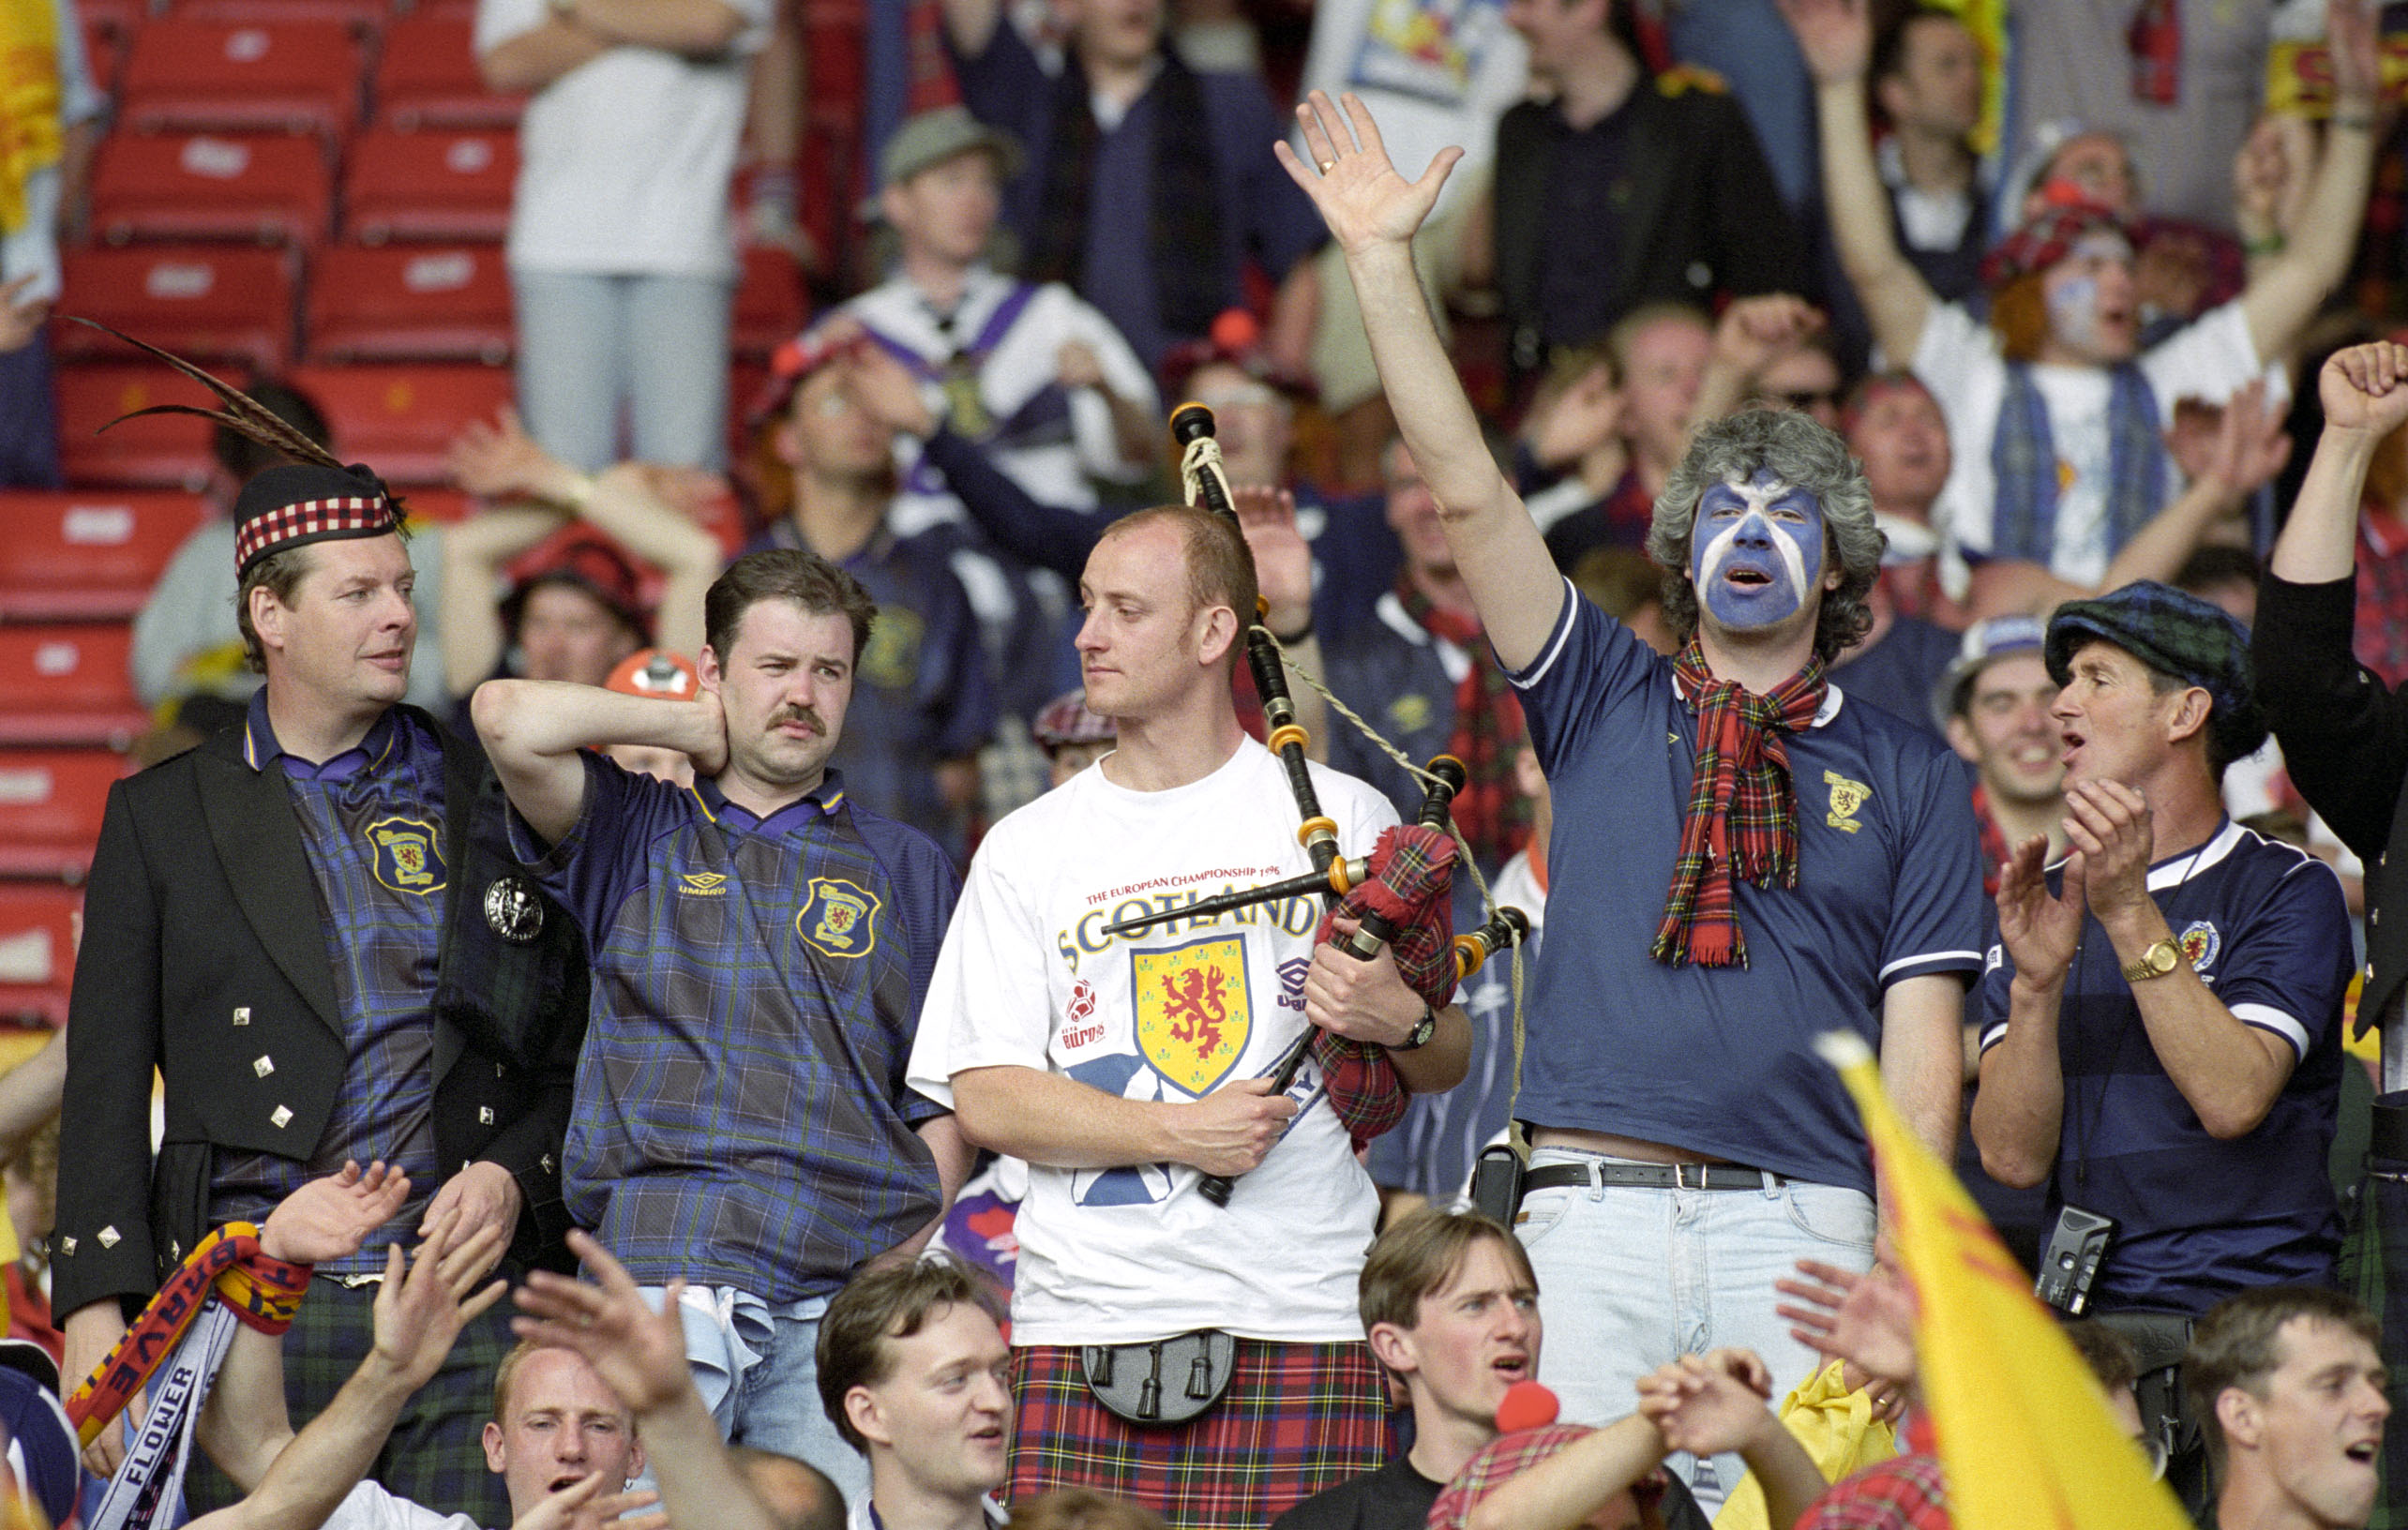 Scotland fans made themselves heard at Wembley.